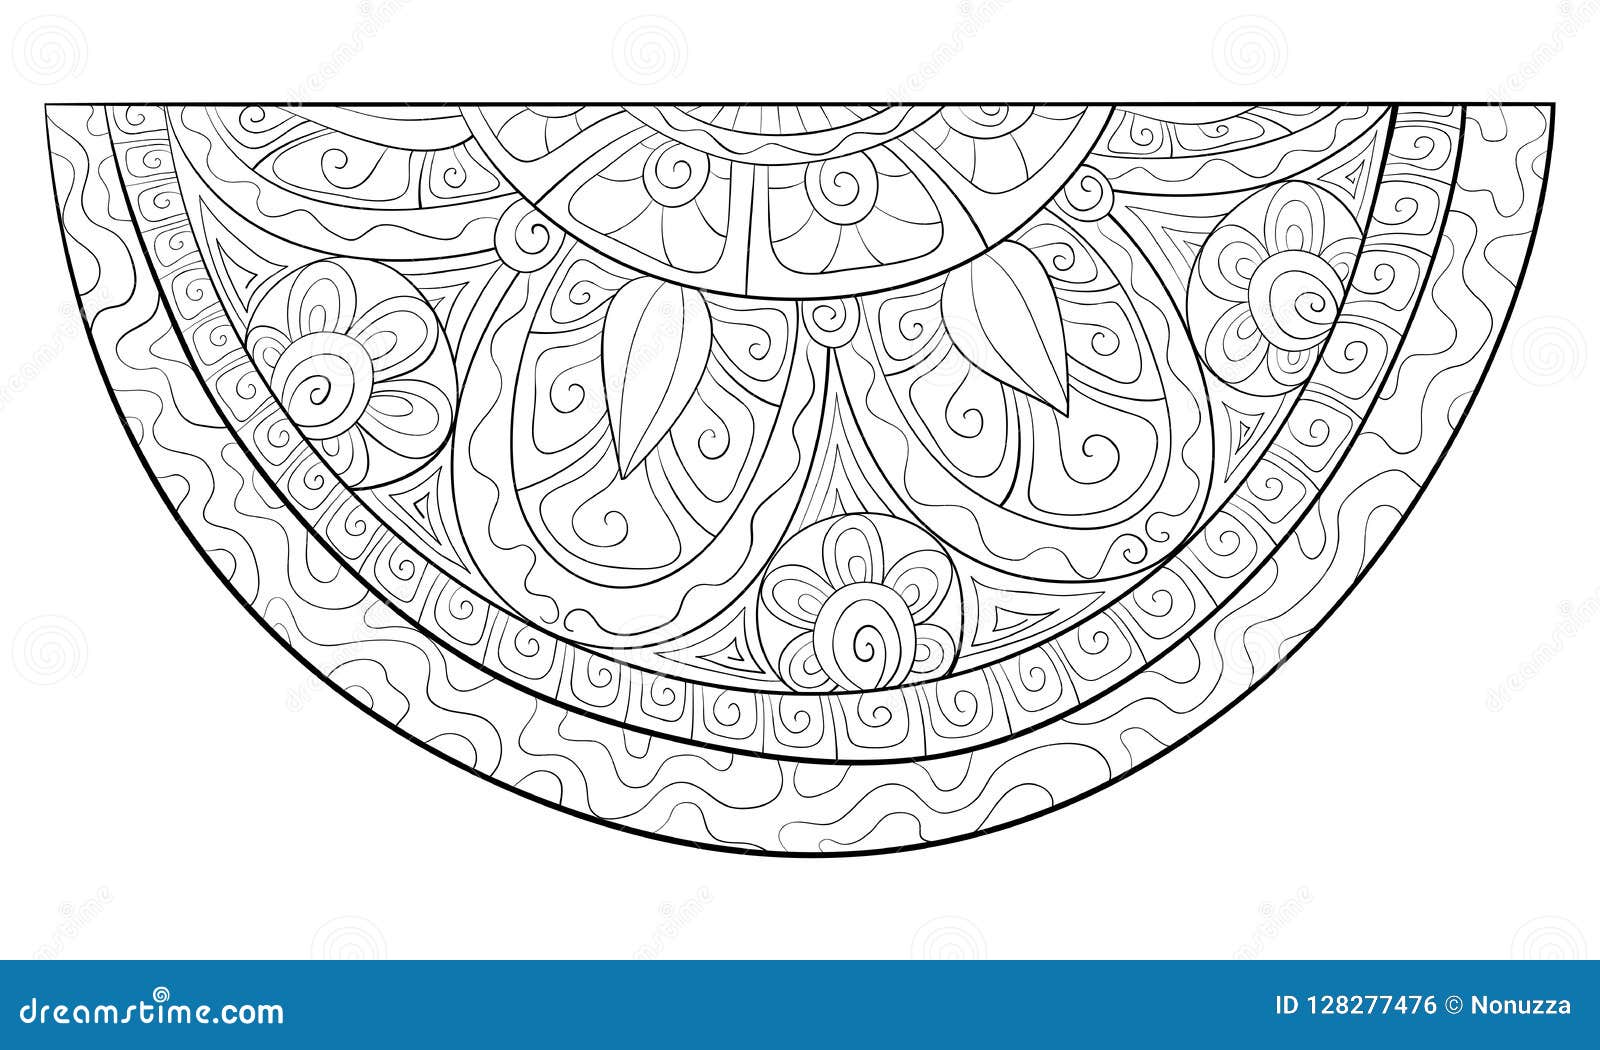 Adult Coloring Book Page A Cute Slice Of Watermelon Image For Relaxing Activity Stock Vector Illustration Of Brunch Food 128277476